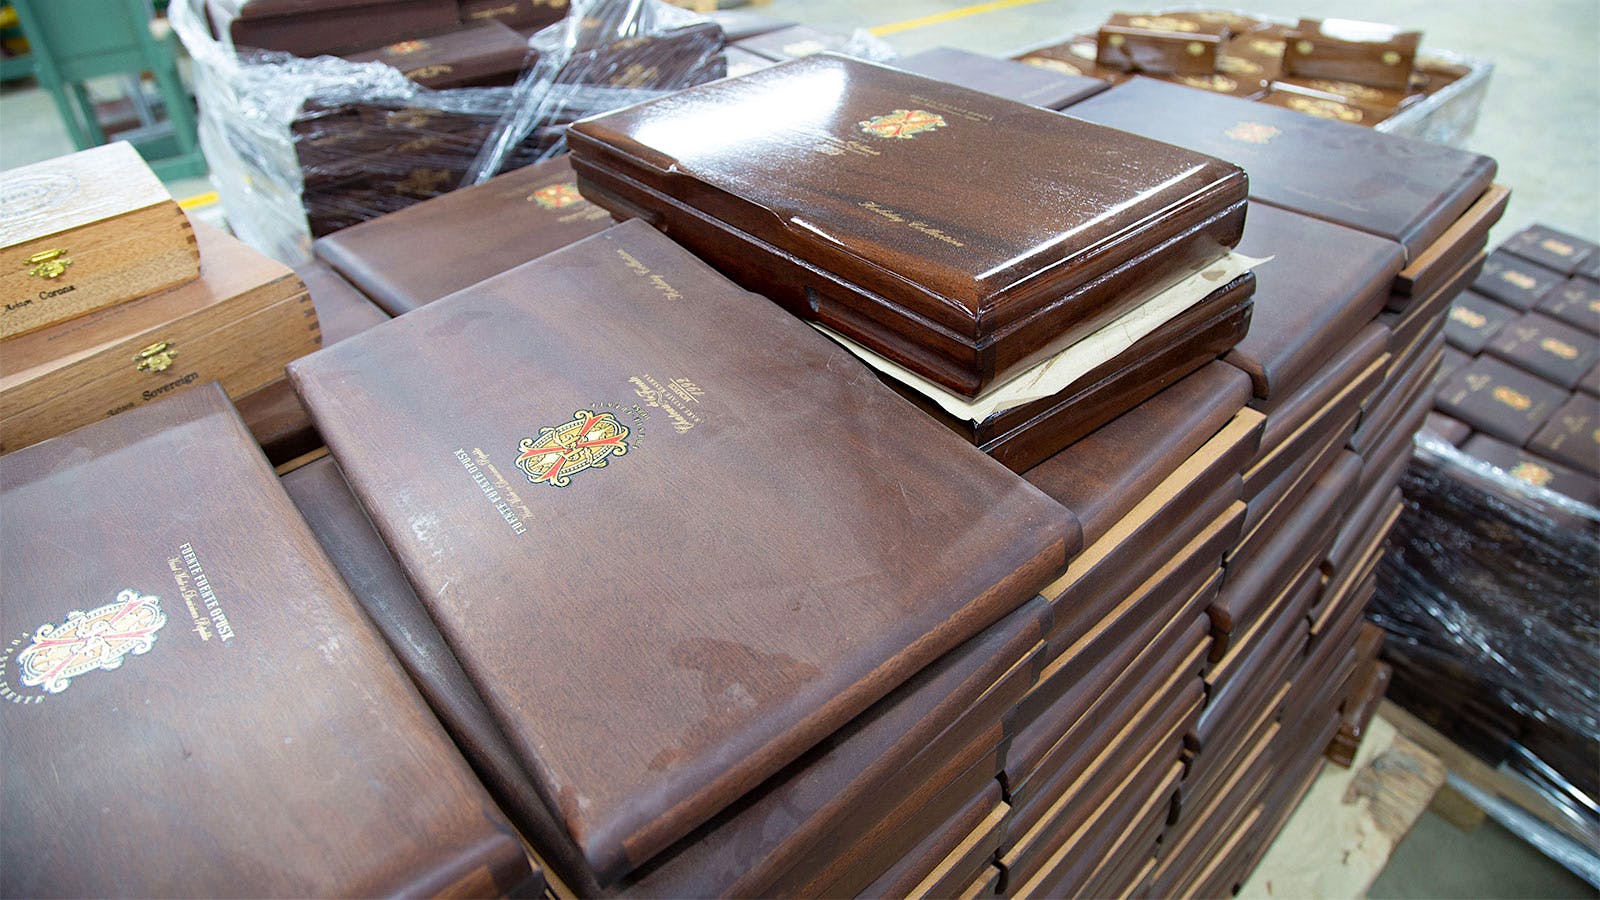 A stack of Fuente Fuente OpusX boxes that will soon be lacquered like the shiny one on top.